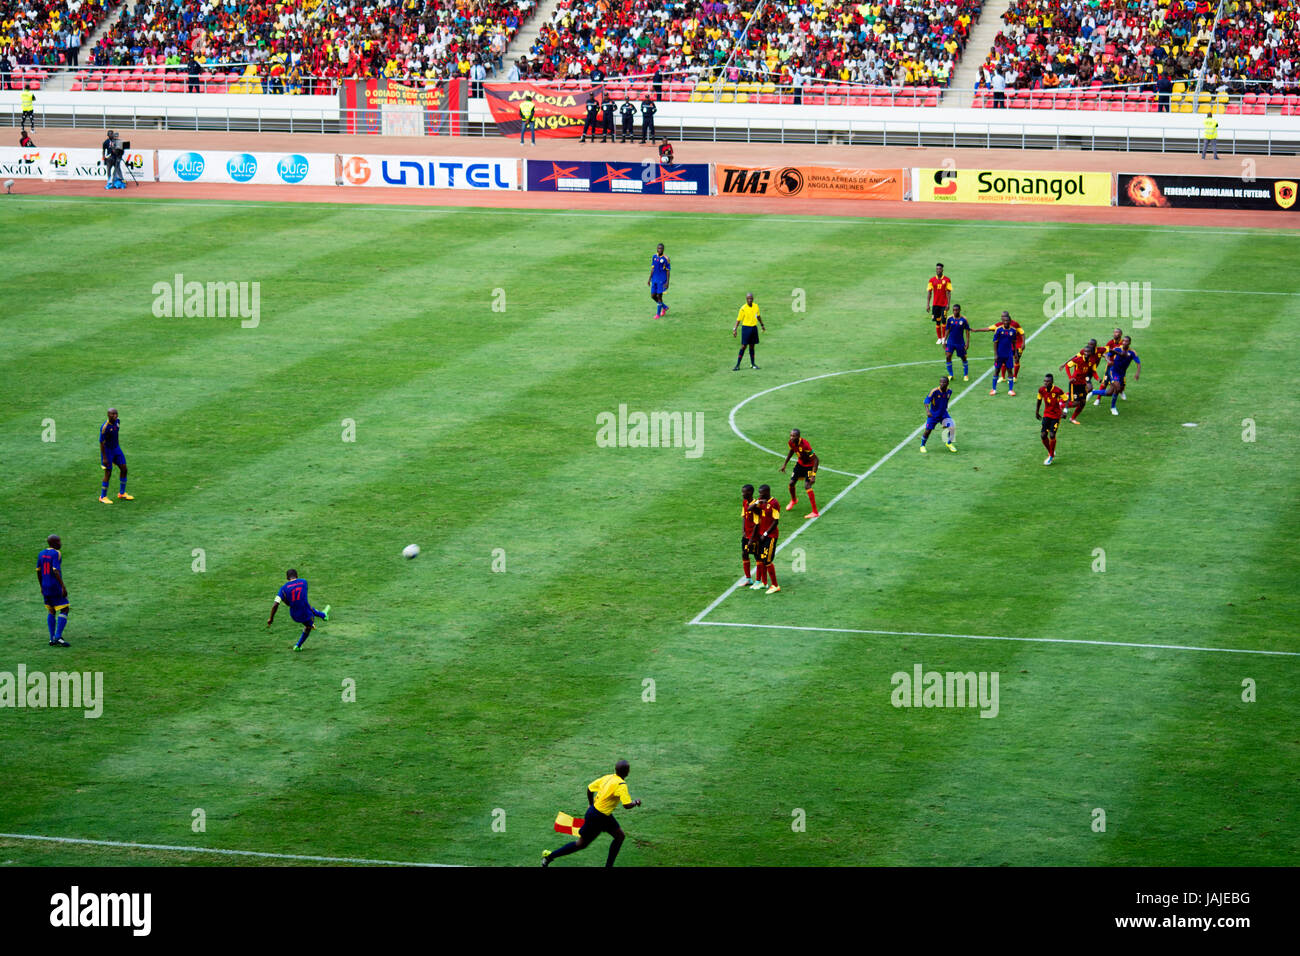 LUANDA, ANGOLA - JULY 04, 2015: Angola takes on South Africa in the group stage of the 2015 African Nations Championship in Luanda at the 11 de Novemb Stock Photo